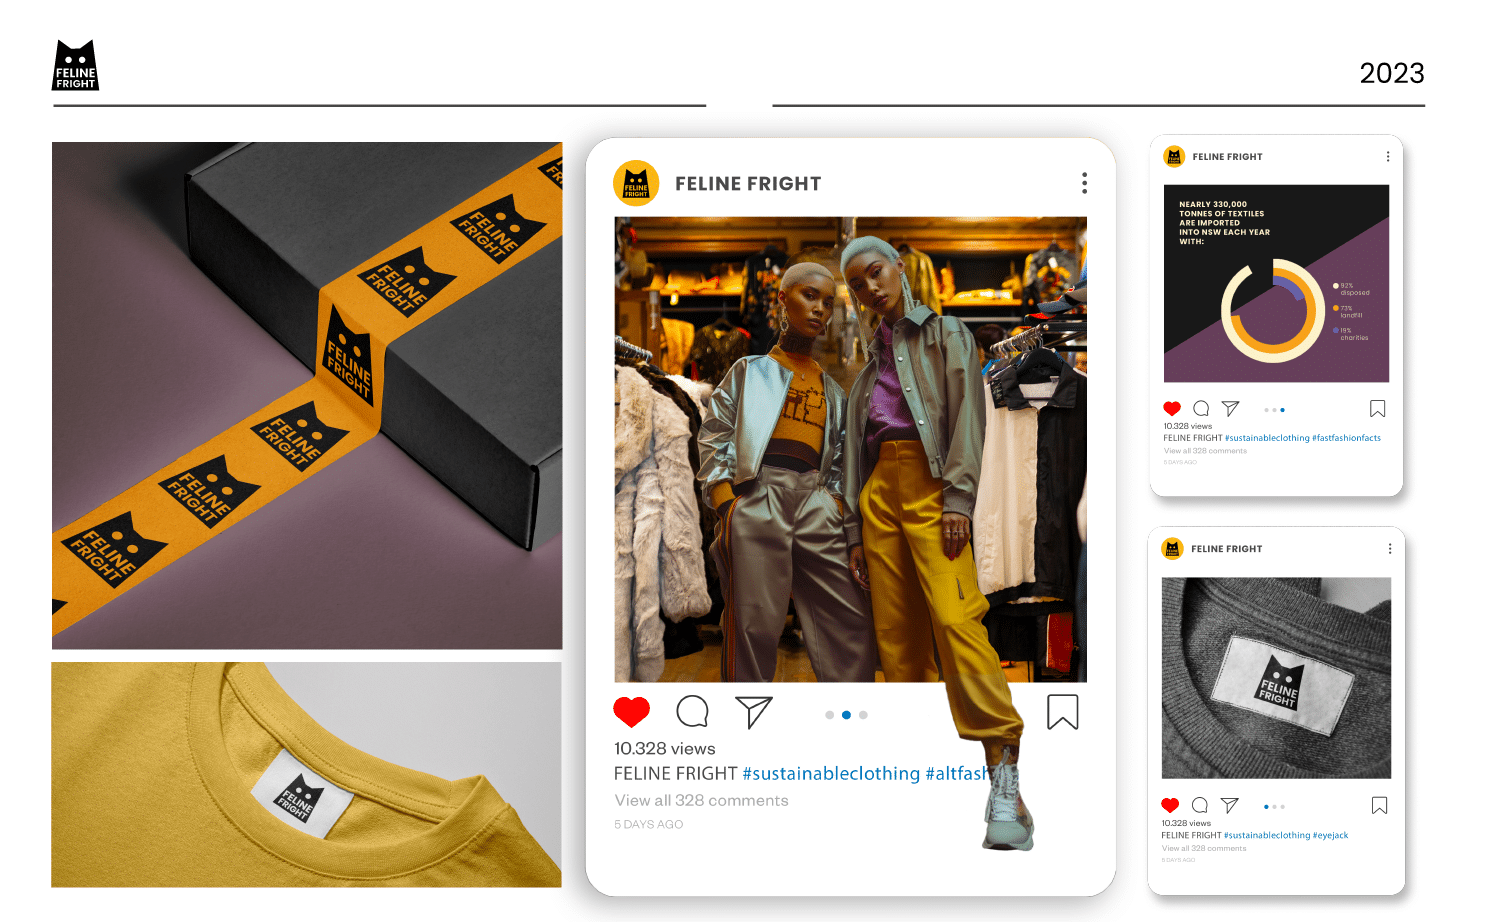 Yellow shirt with a Feline Fright tag, orange packing tape with the feline fright logo on it and Feline Fright's Instagram posts.
